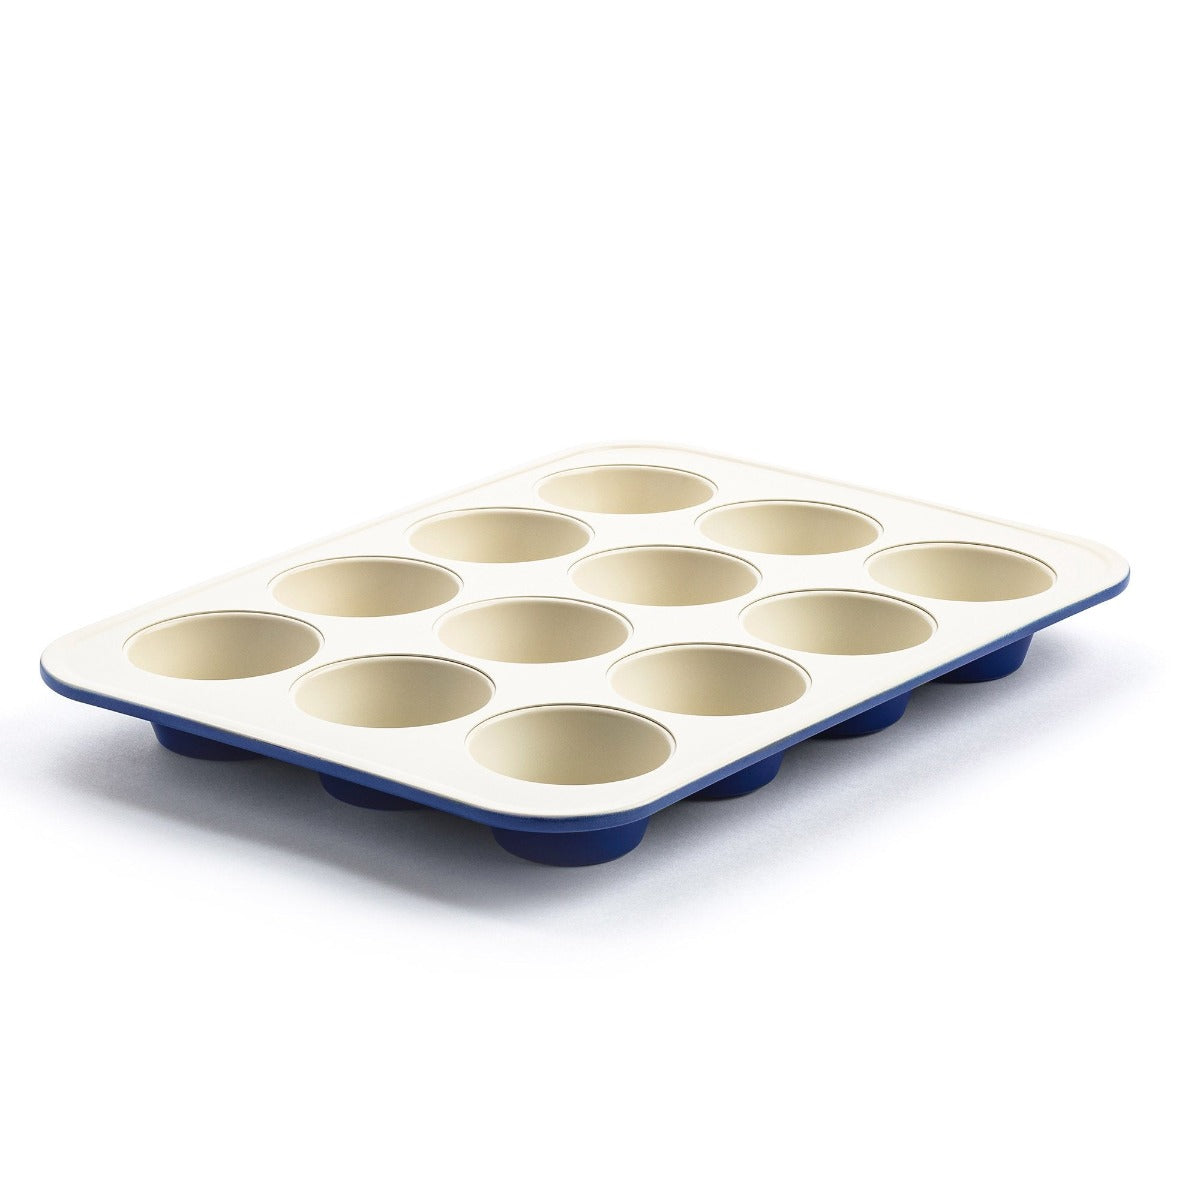 Caraway Muffin Pan in Navy  Muffin pan, Blue berry muffins, Muffin